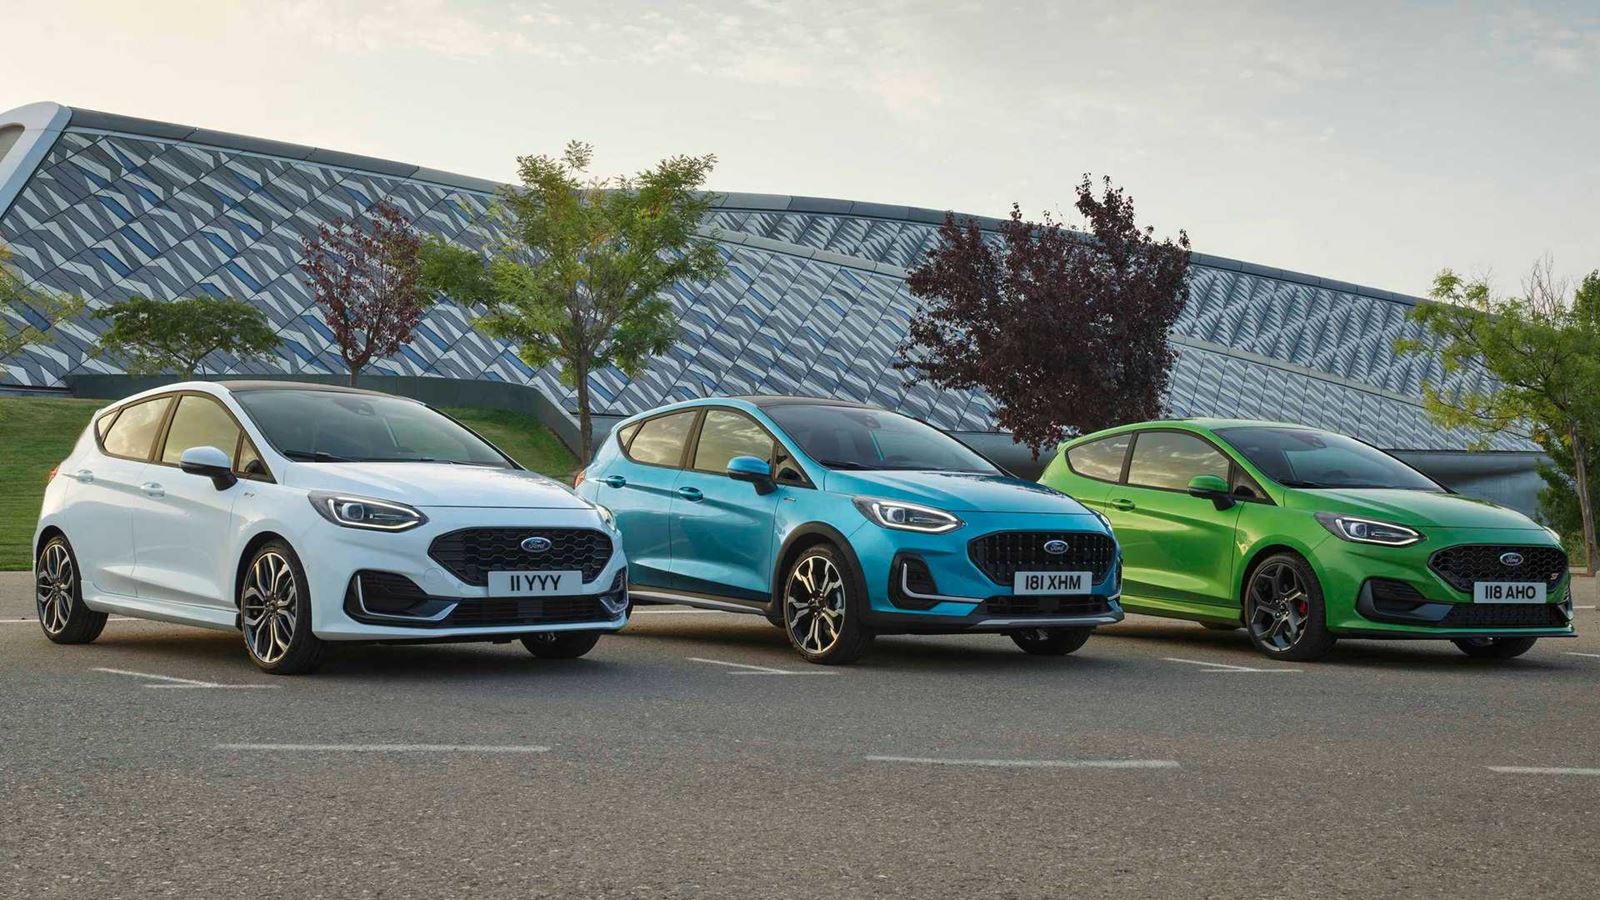 The Ford Fiesta 2022 arrives in Spain: Here are the prices